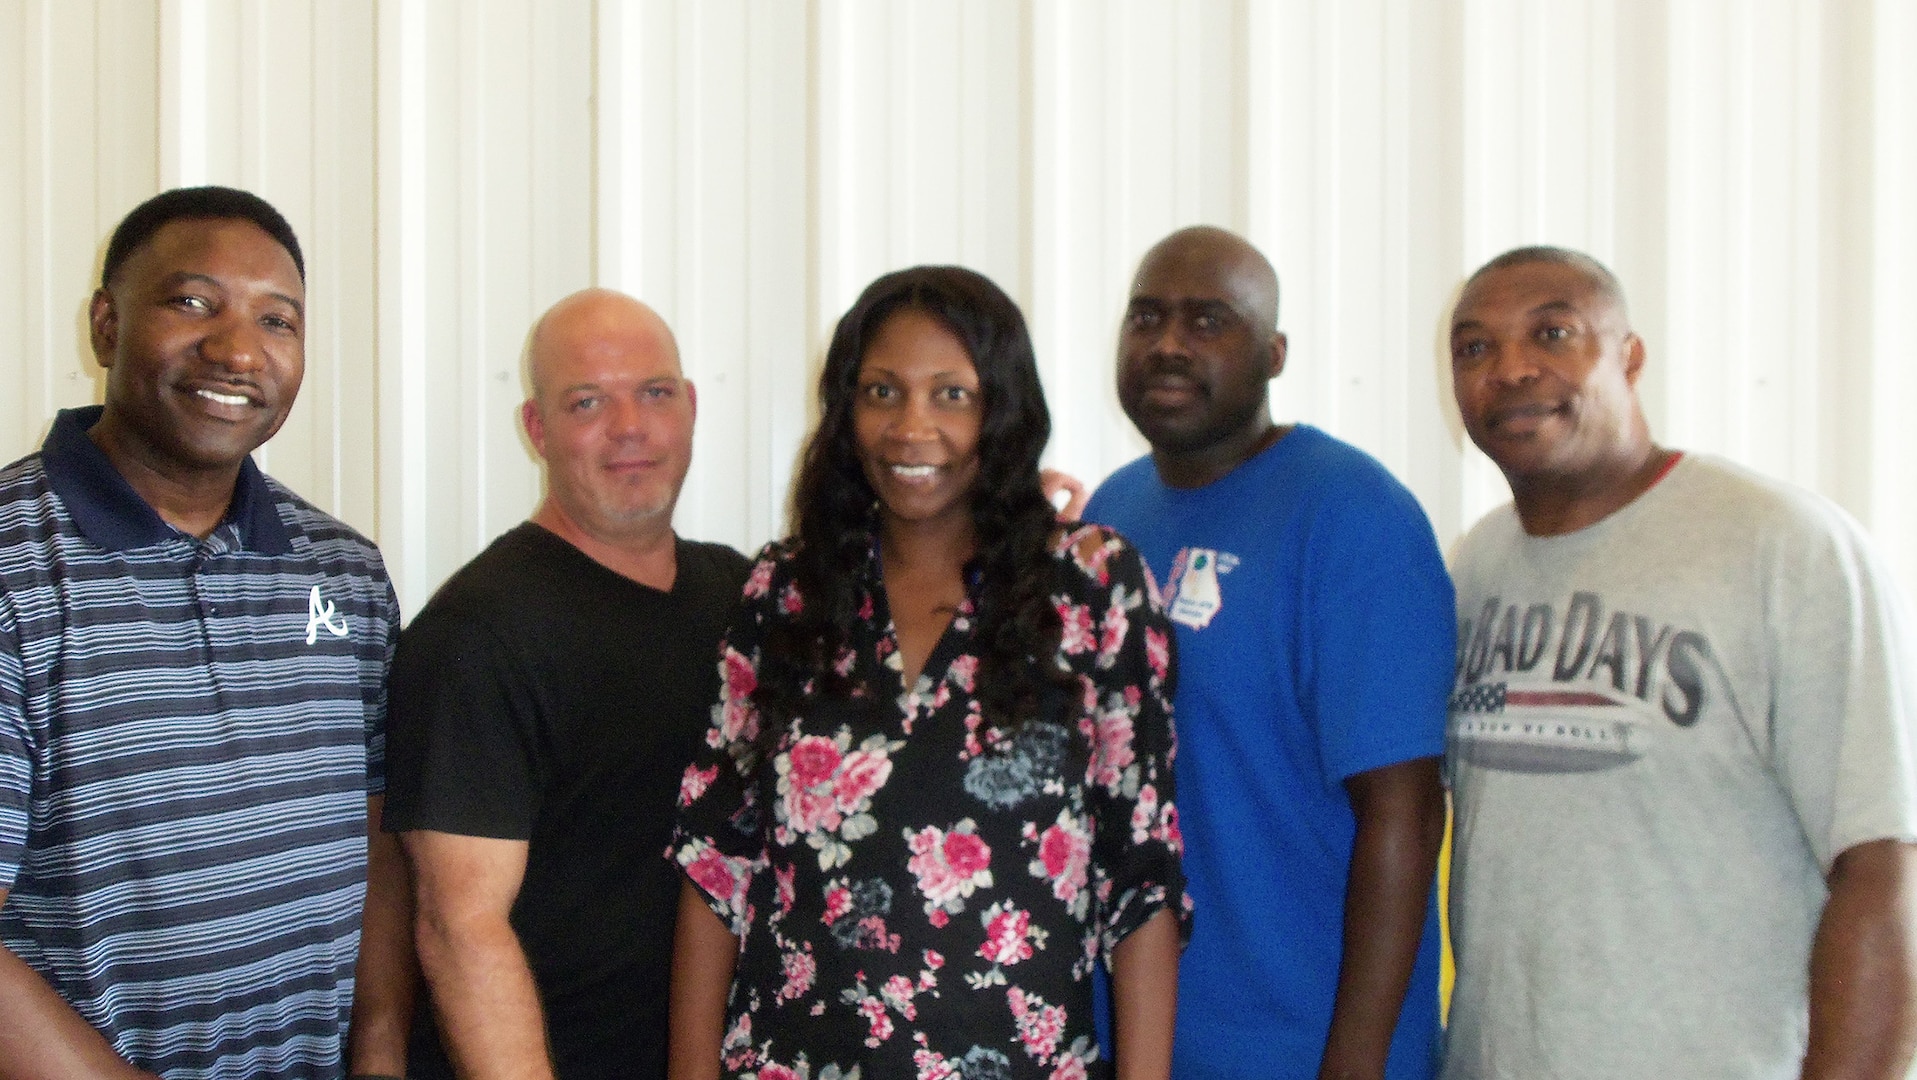 The DLA Distribution Warner Robins, Georgia, Preservation, Packaging, Packing and Marking Section Special Assets Division team (L-R): Ernest Melonson, Greg Bedford, Christie Williams, Jonah Blunt and Jettie Evans. They were selected as DLA Distribution Team of the Quarter for the 3rd Quarter 2017. Teammates not pictured: Richard Langford and Michael Scott.